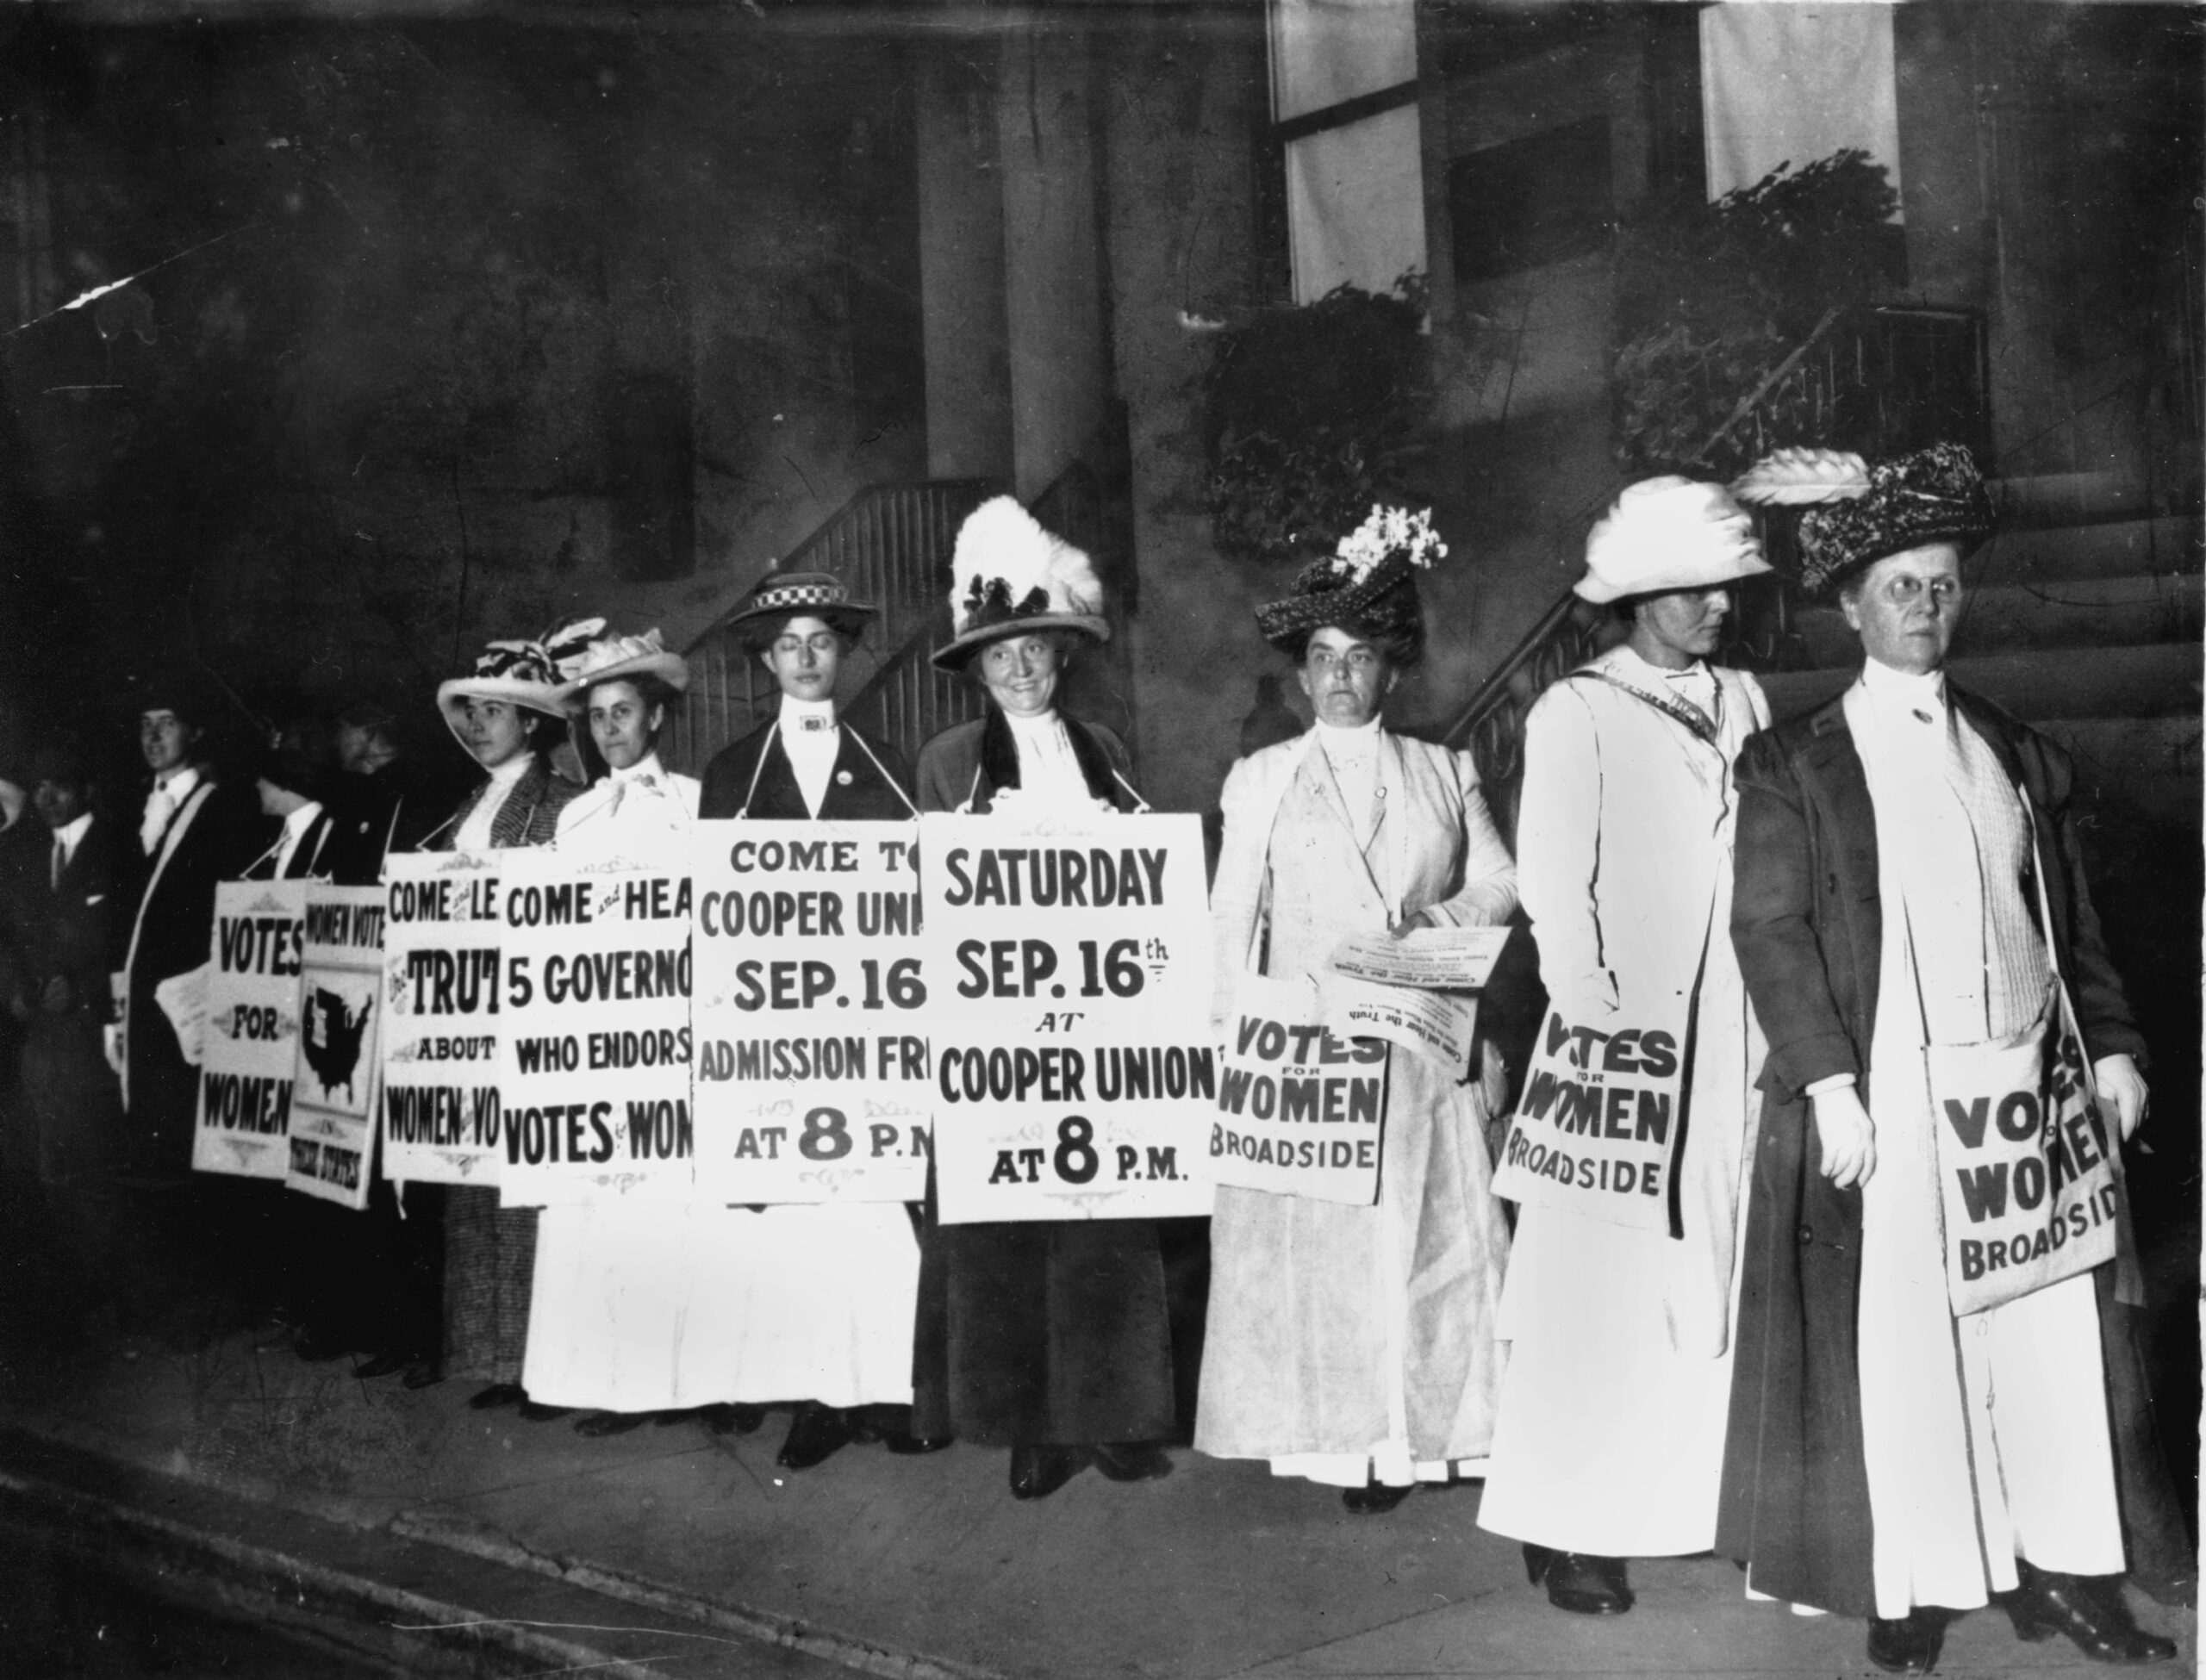 women rally for women's suffrage in New York in 1916